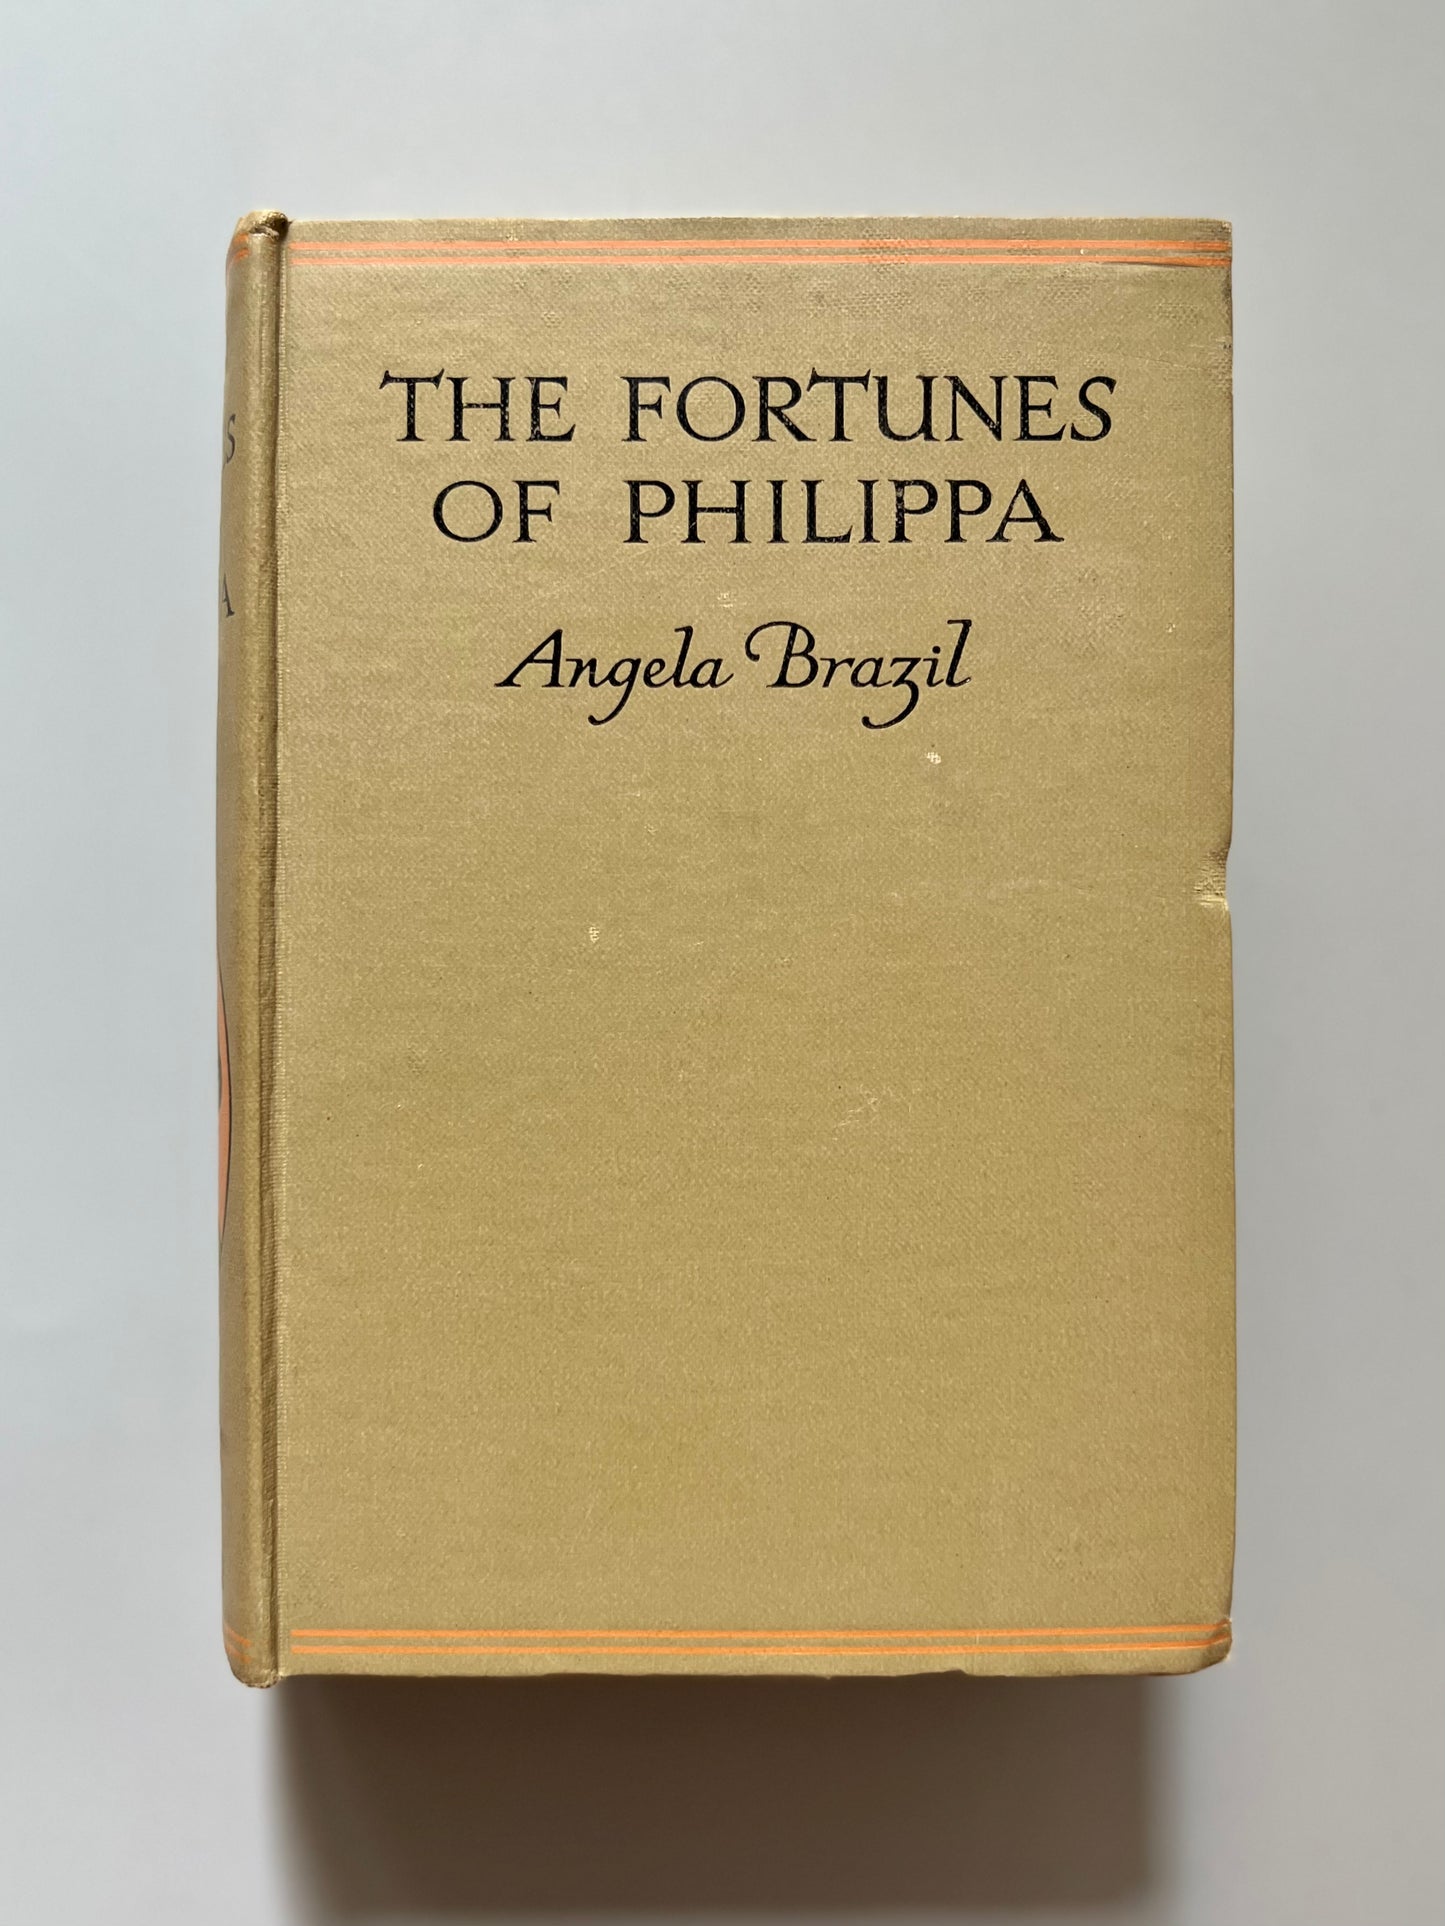 The fortunes of Philippa, Angela Brazil - Blackie & Son, ca. 1930